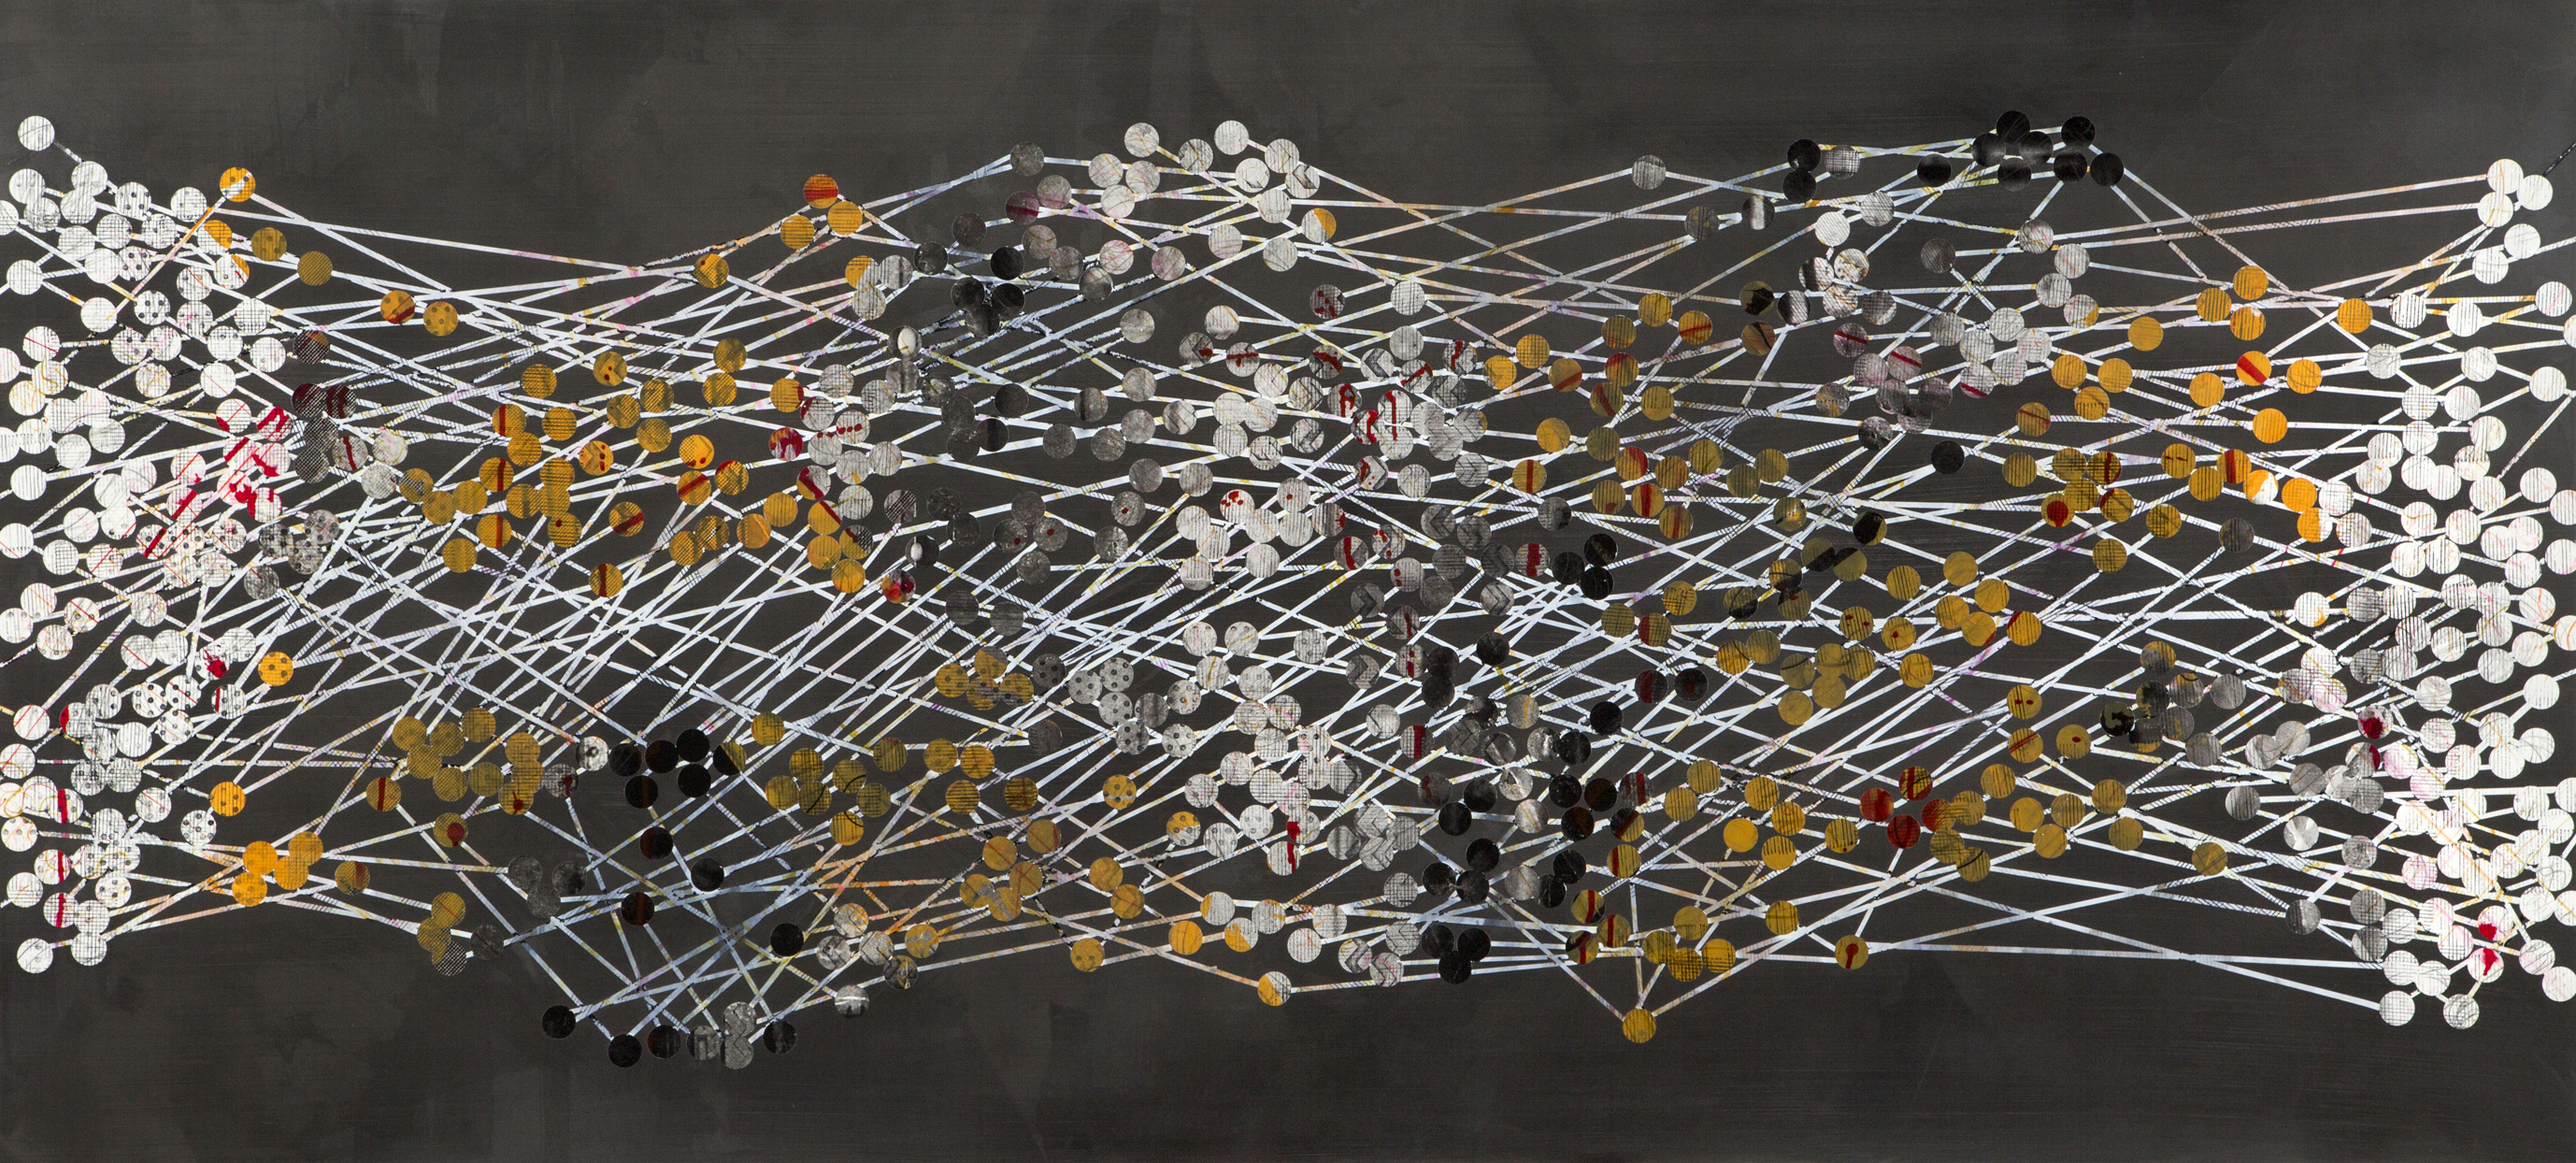 TRIBE 191 - 2014, acrylic, watercolor, graphite on paper, 30.25 x 65.25 inches (SOLD)